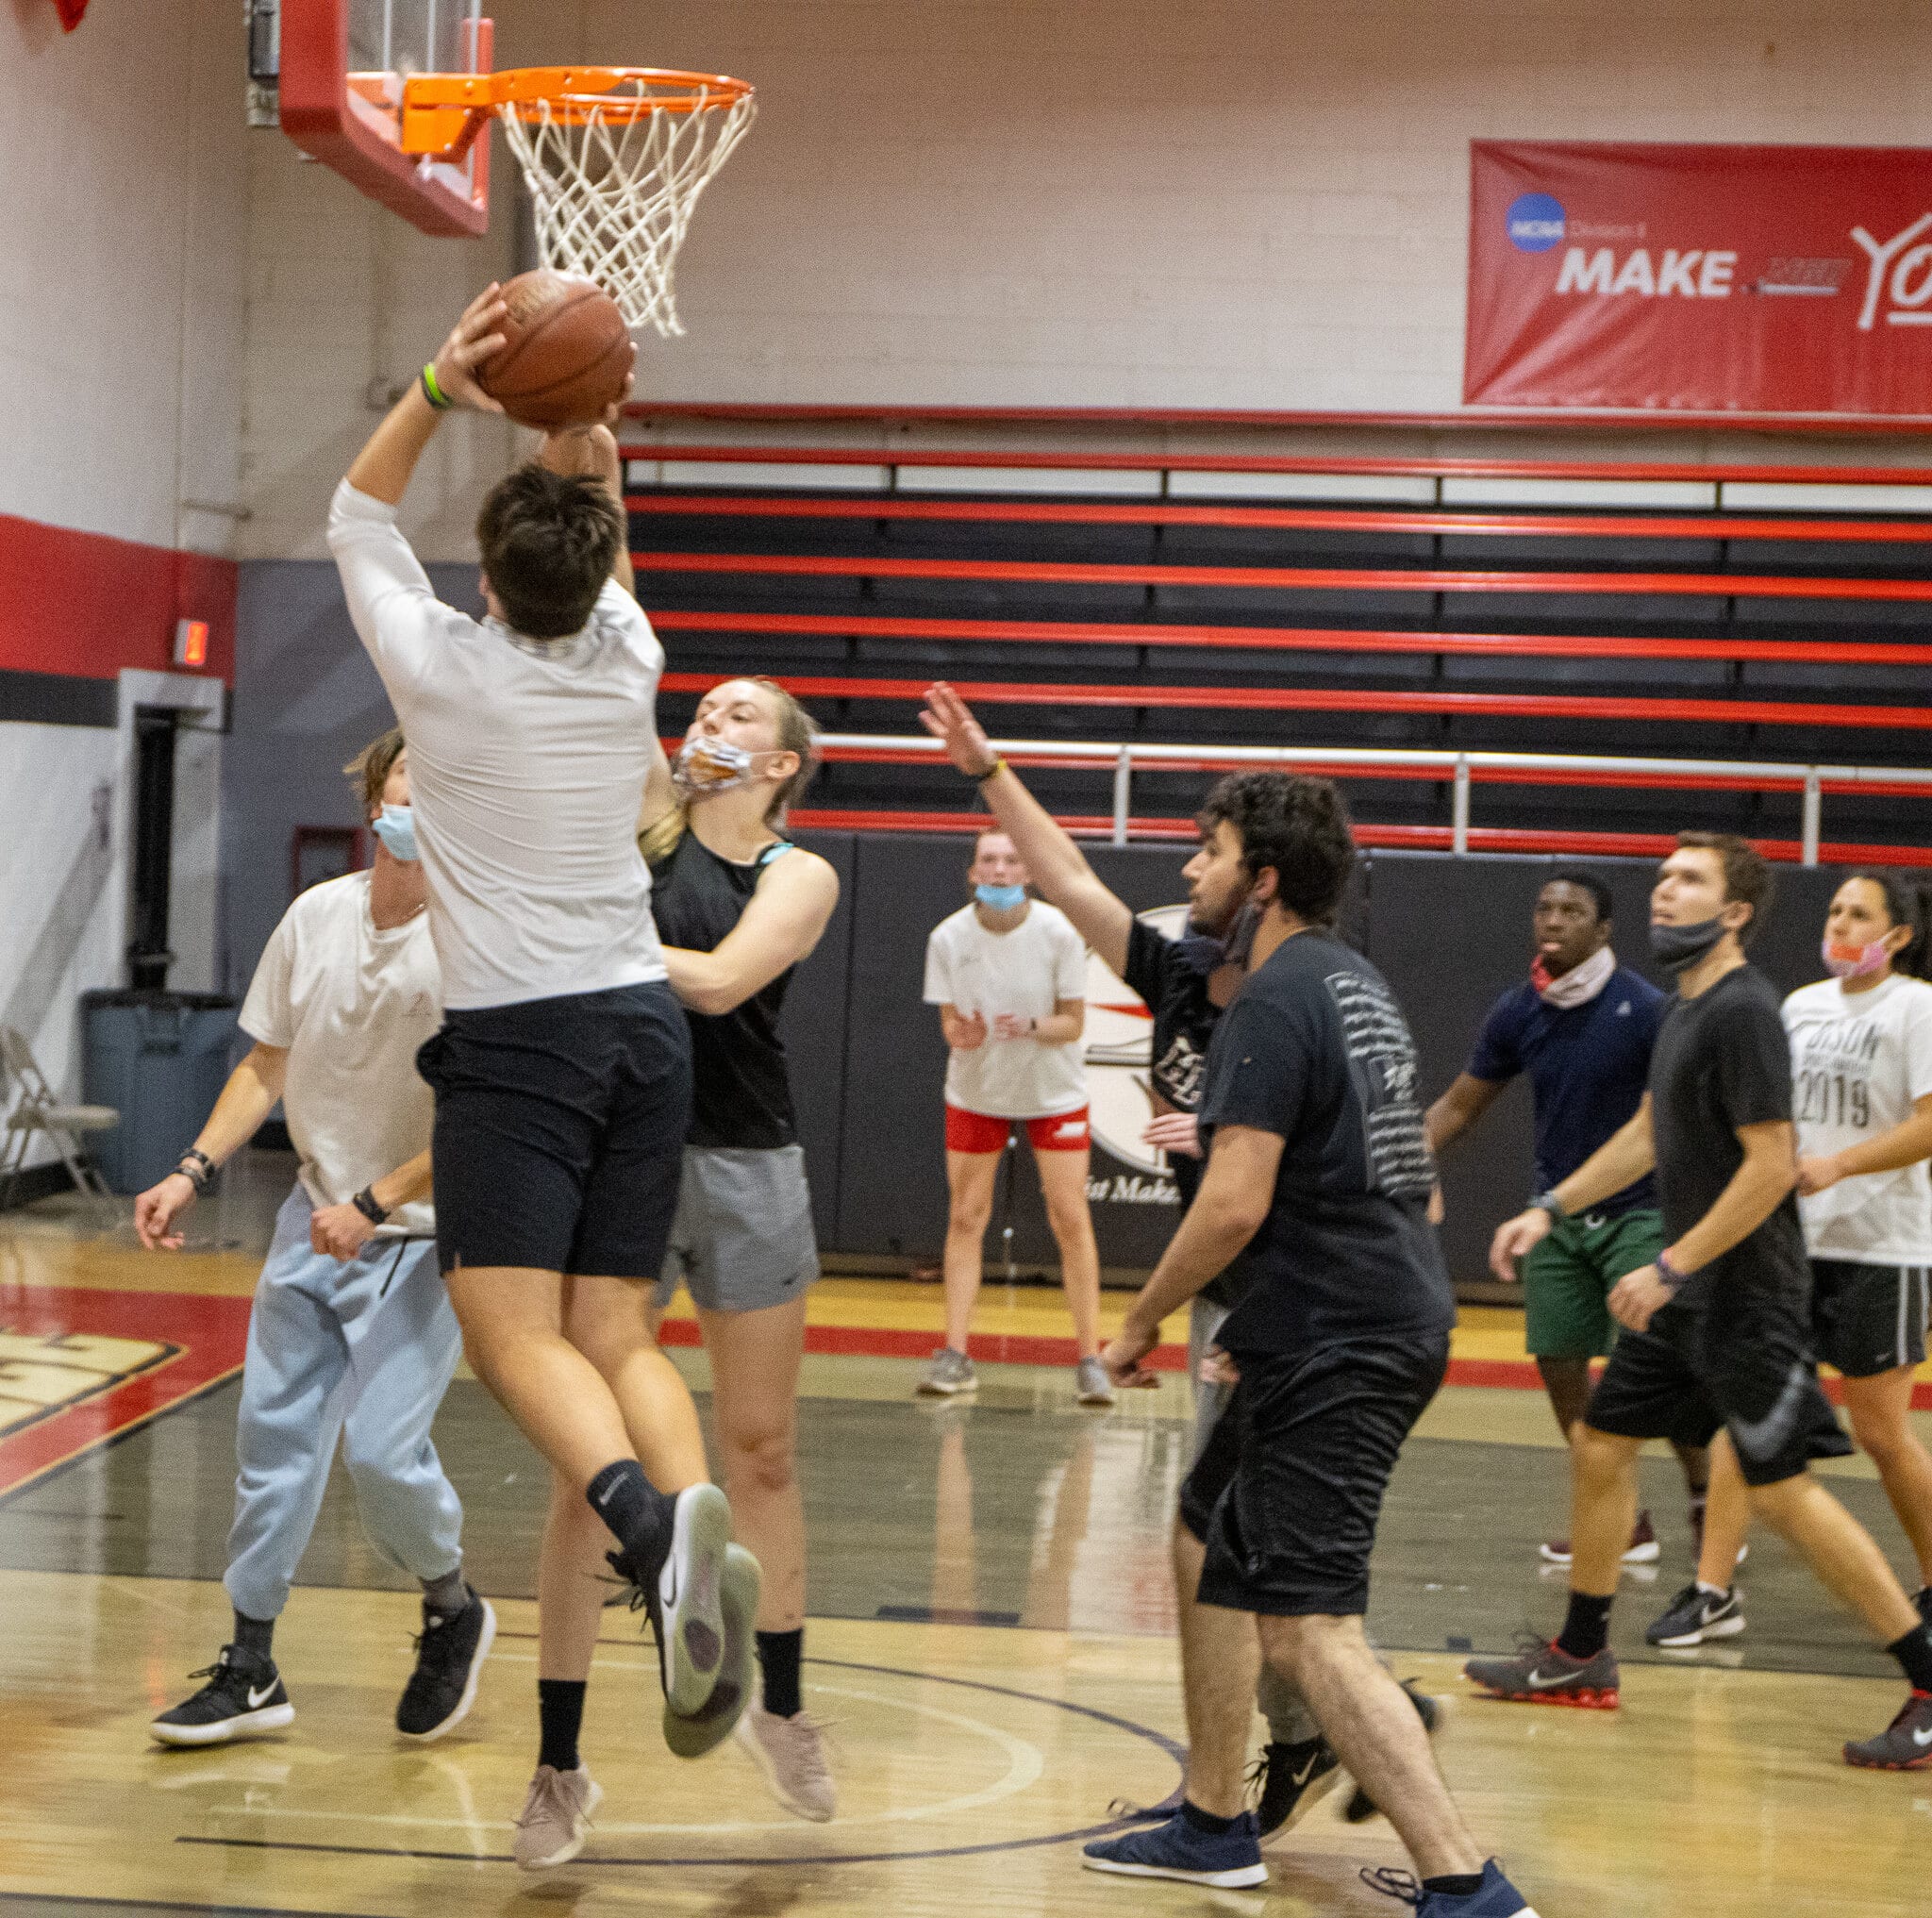 The same student captures everyones attention as he drives into the paint for another layup.